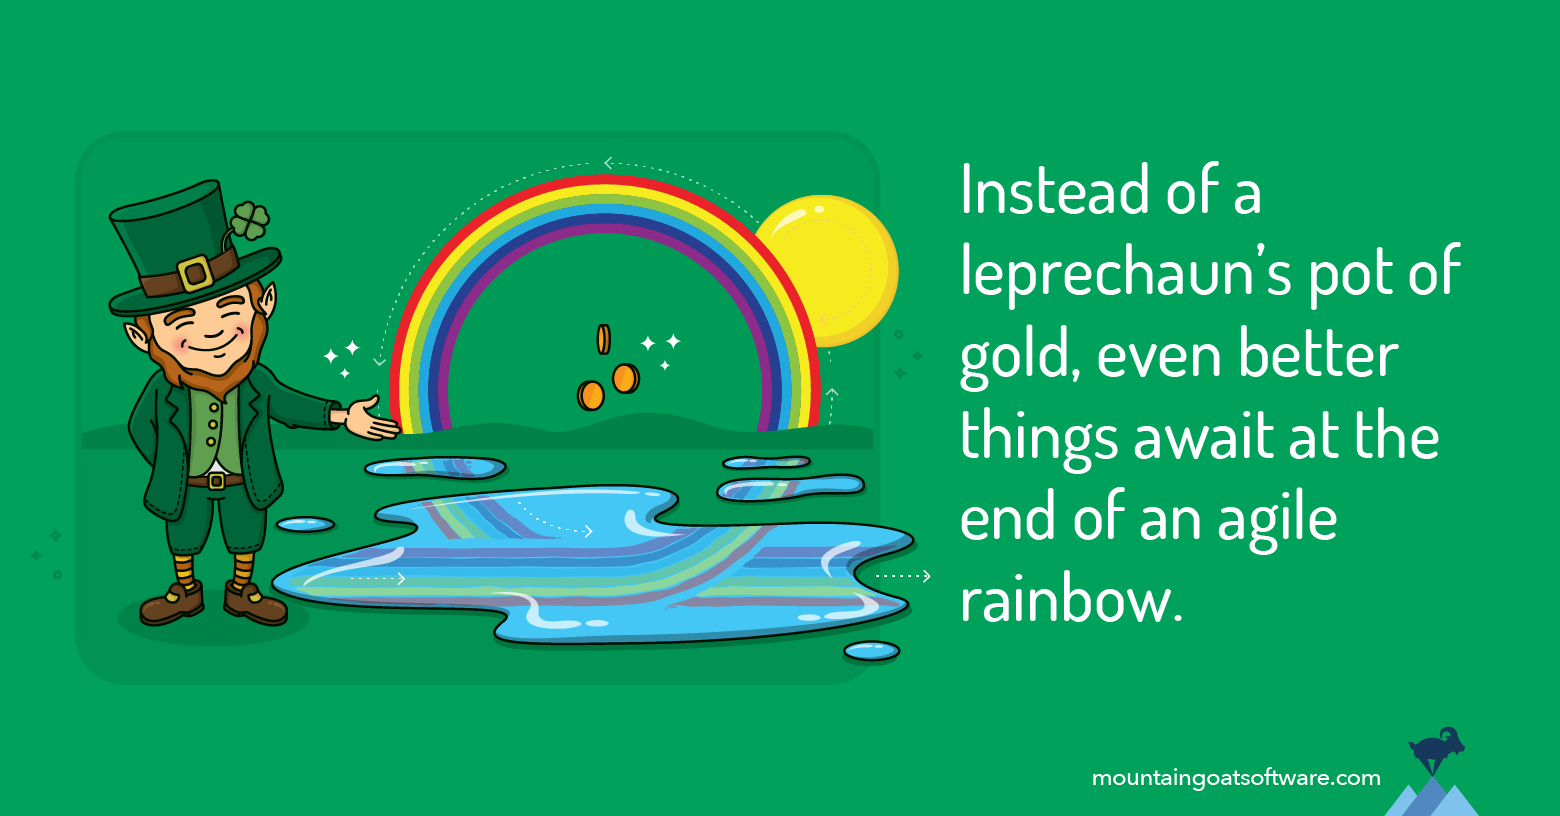 Why Scrum Is Better than Anything You’ll Find at the End of a Rainbow